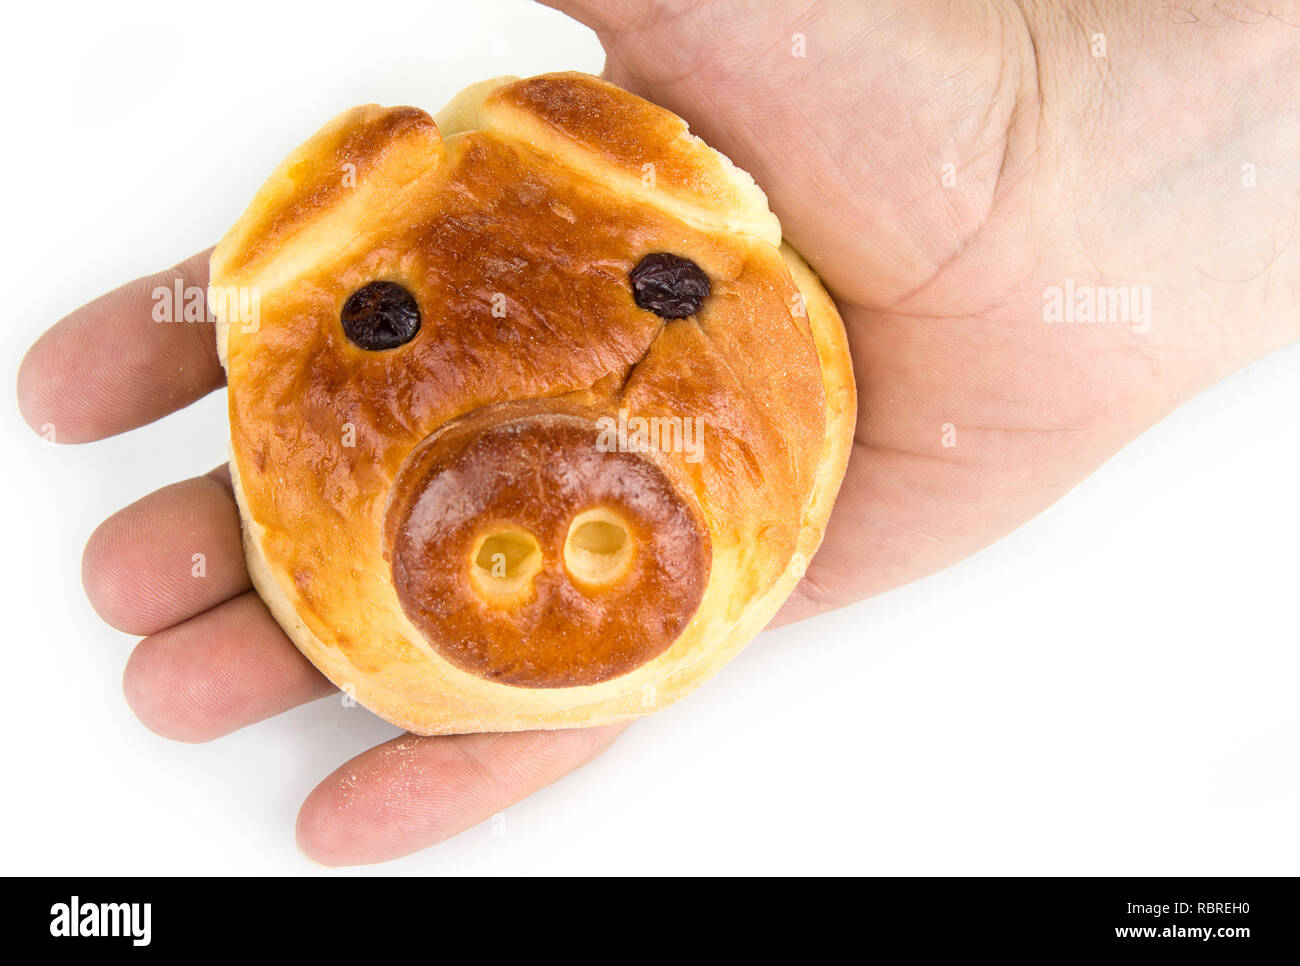 Bun with sweet stuffing in shape of pig head Stock Photo